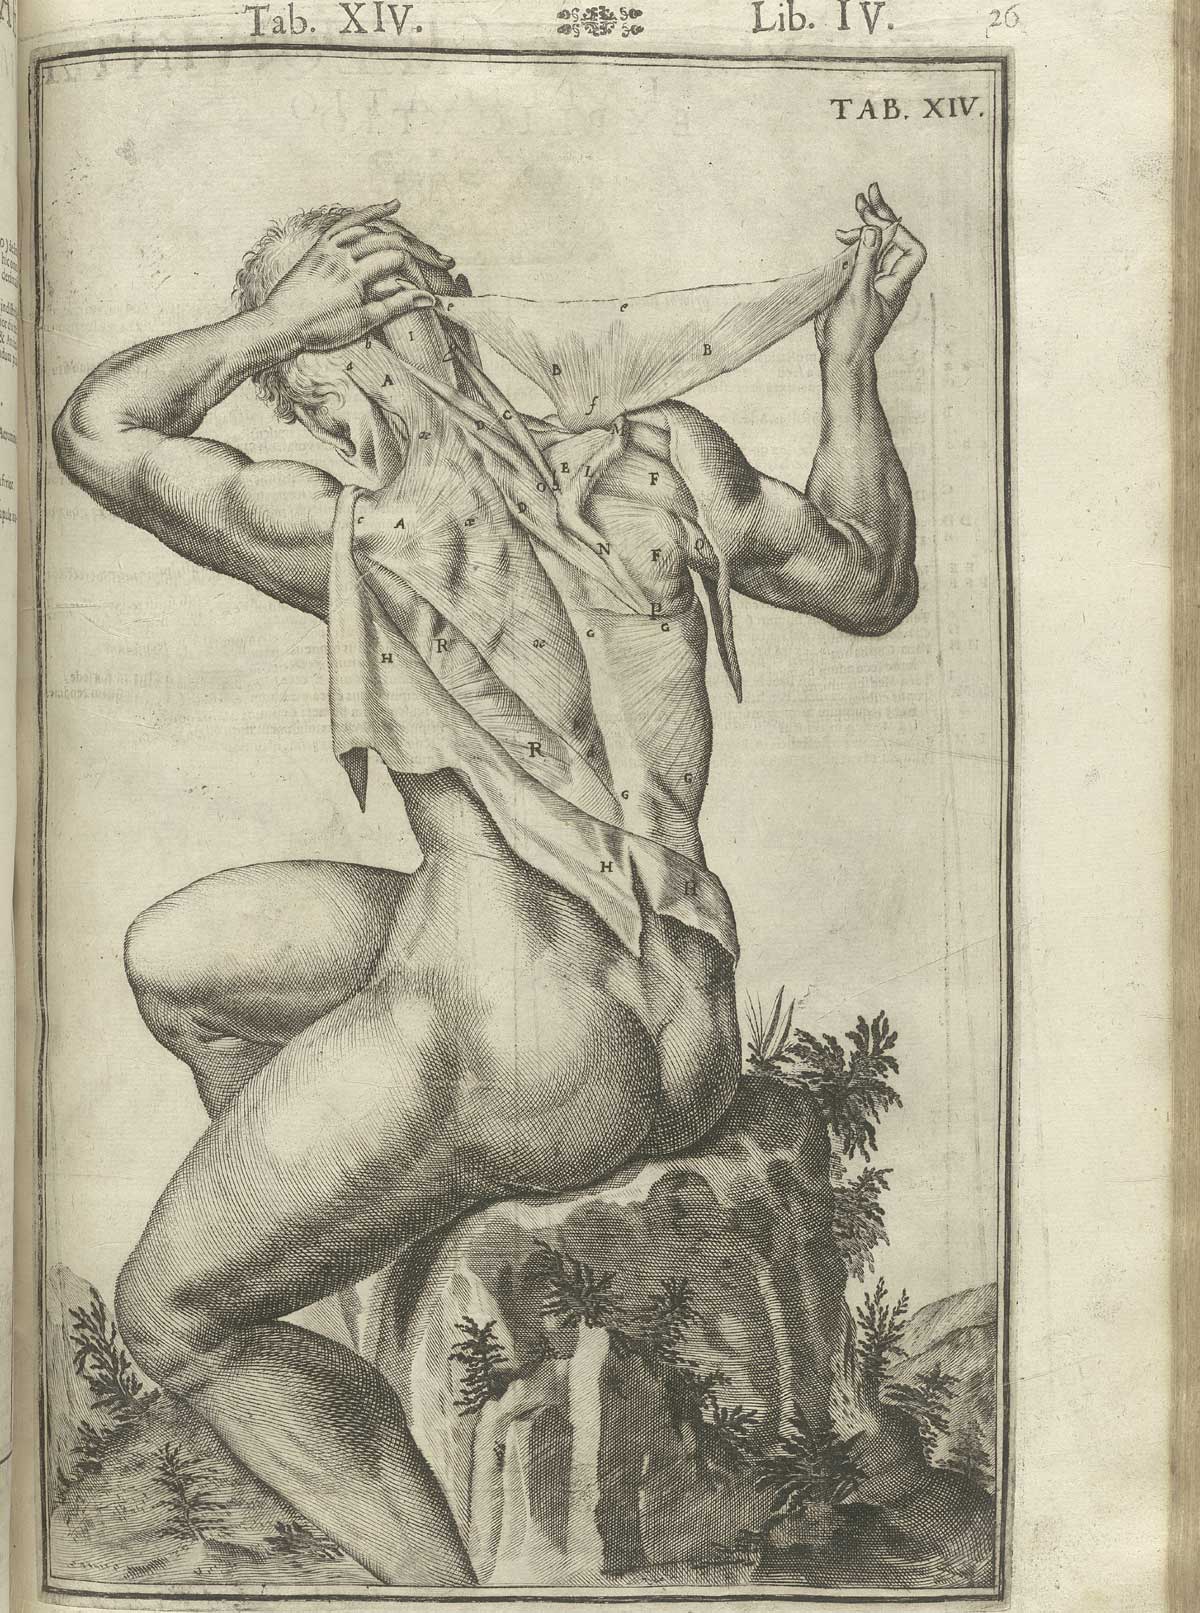 Engraving showing a nude male anatomical figure in a pastoral setting sitting on a tree stump with his back to the viewer, holding up the ends of his right deltoid muscle in his hands, with the rest of his skin pulled away from his back revealing other musculature; from Adriaan van de Spiegel and Giulio Cassieri’s De humani corporis fabrica libri decem, Venice, 1627, NLM call no. WZ 250 S755dh 1627.